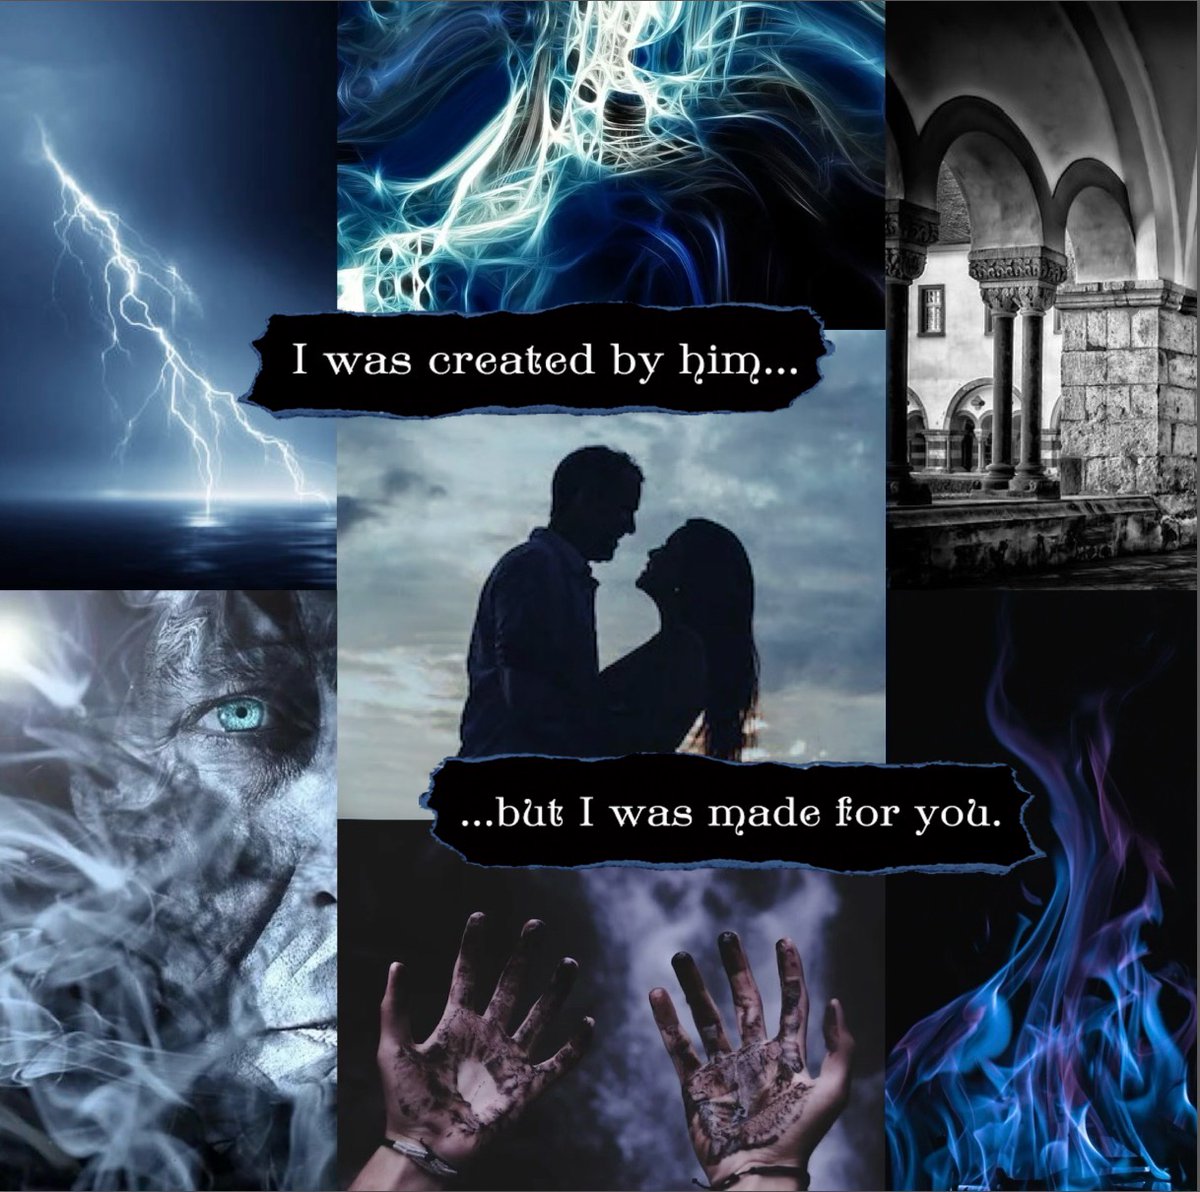 THE SANDMAN X COUNT OF MONTE CRISTO The first demon, embodiment of Pride, seeks souls for the devil—but humanity has other plans for him. Fall in love? Check. Betray his master? Check. Suffer devastating punishment? Check. Take revenge? Pending... #MoodPitch #A #F